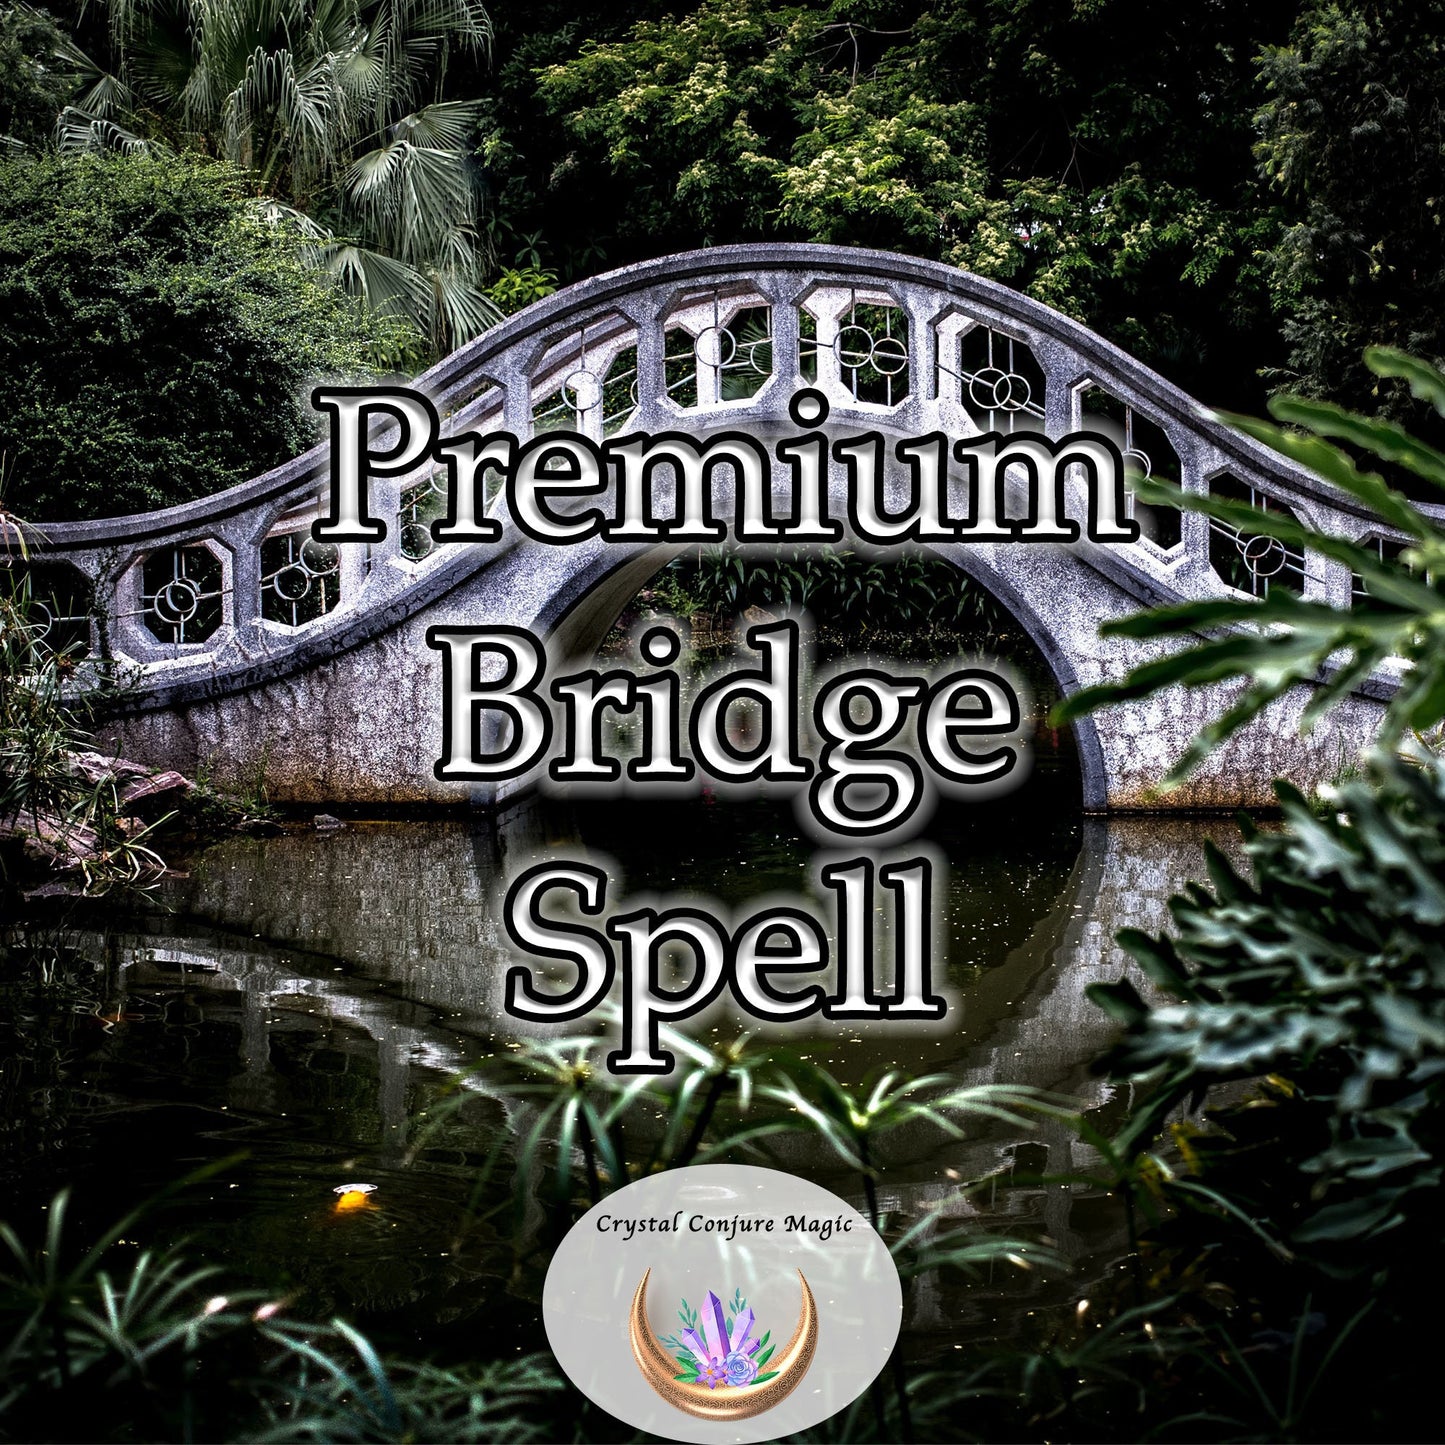 Premium Bridge Spell- reunite you with your lover, and build a stronger, more resilient bond through understanding and acceptance